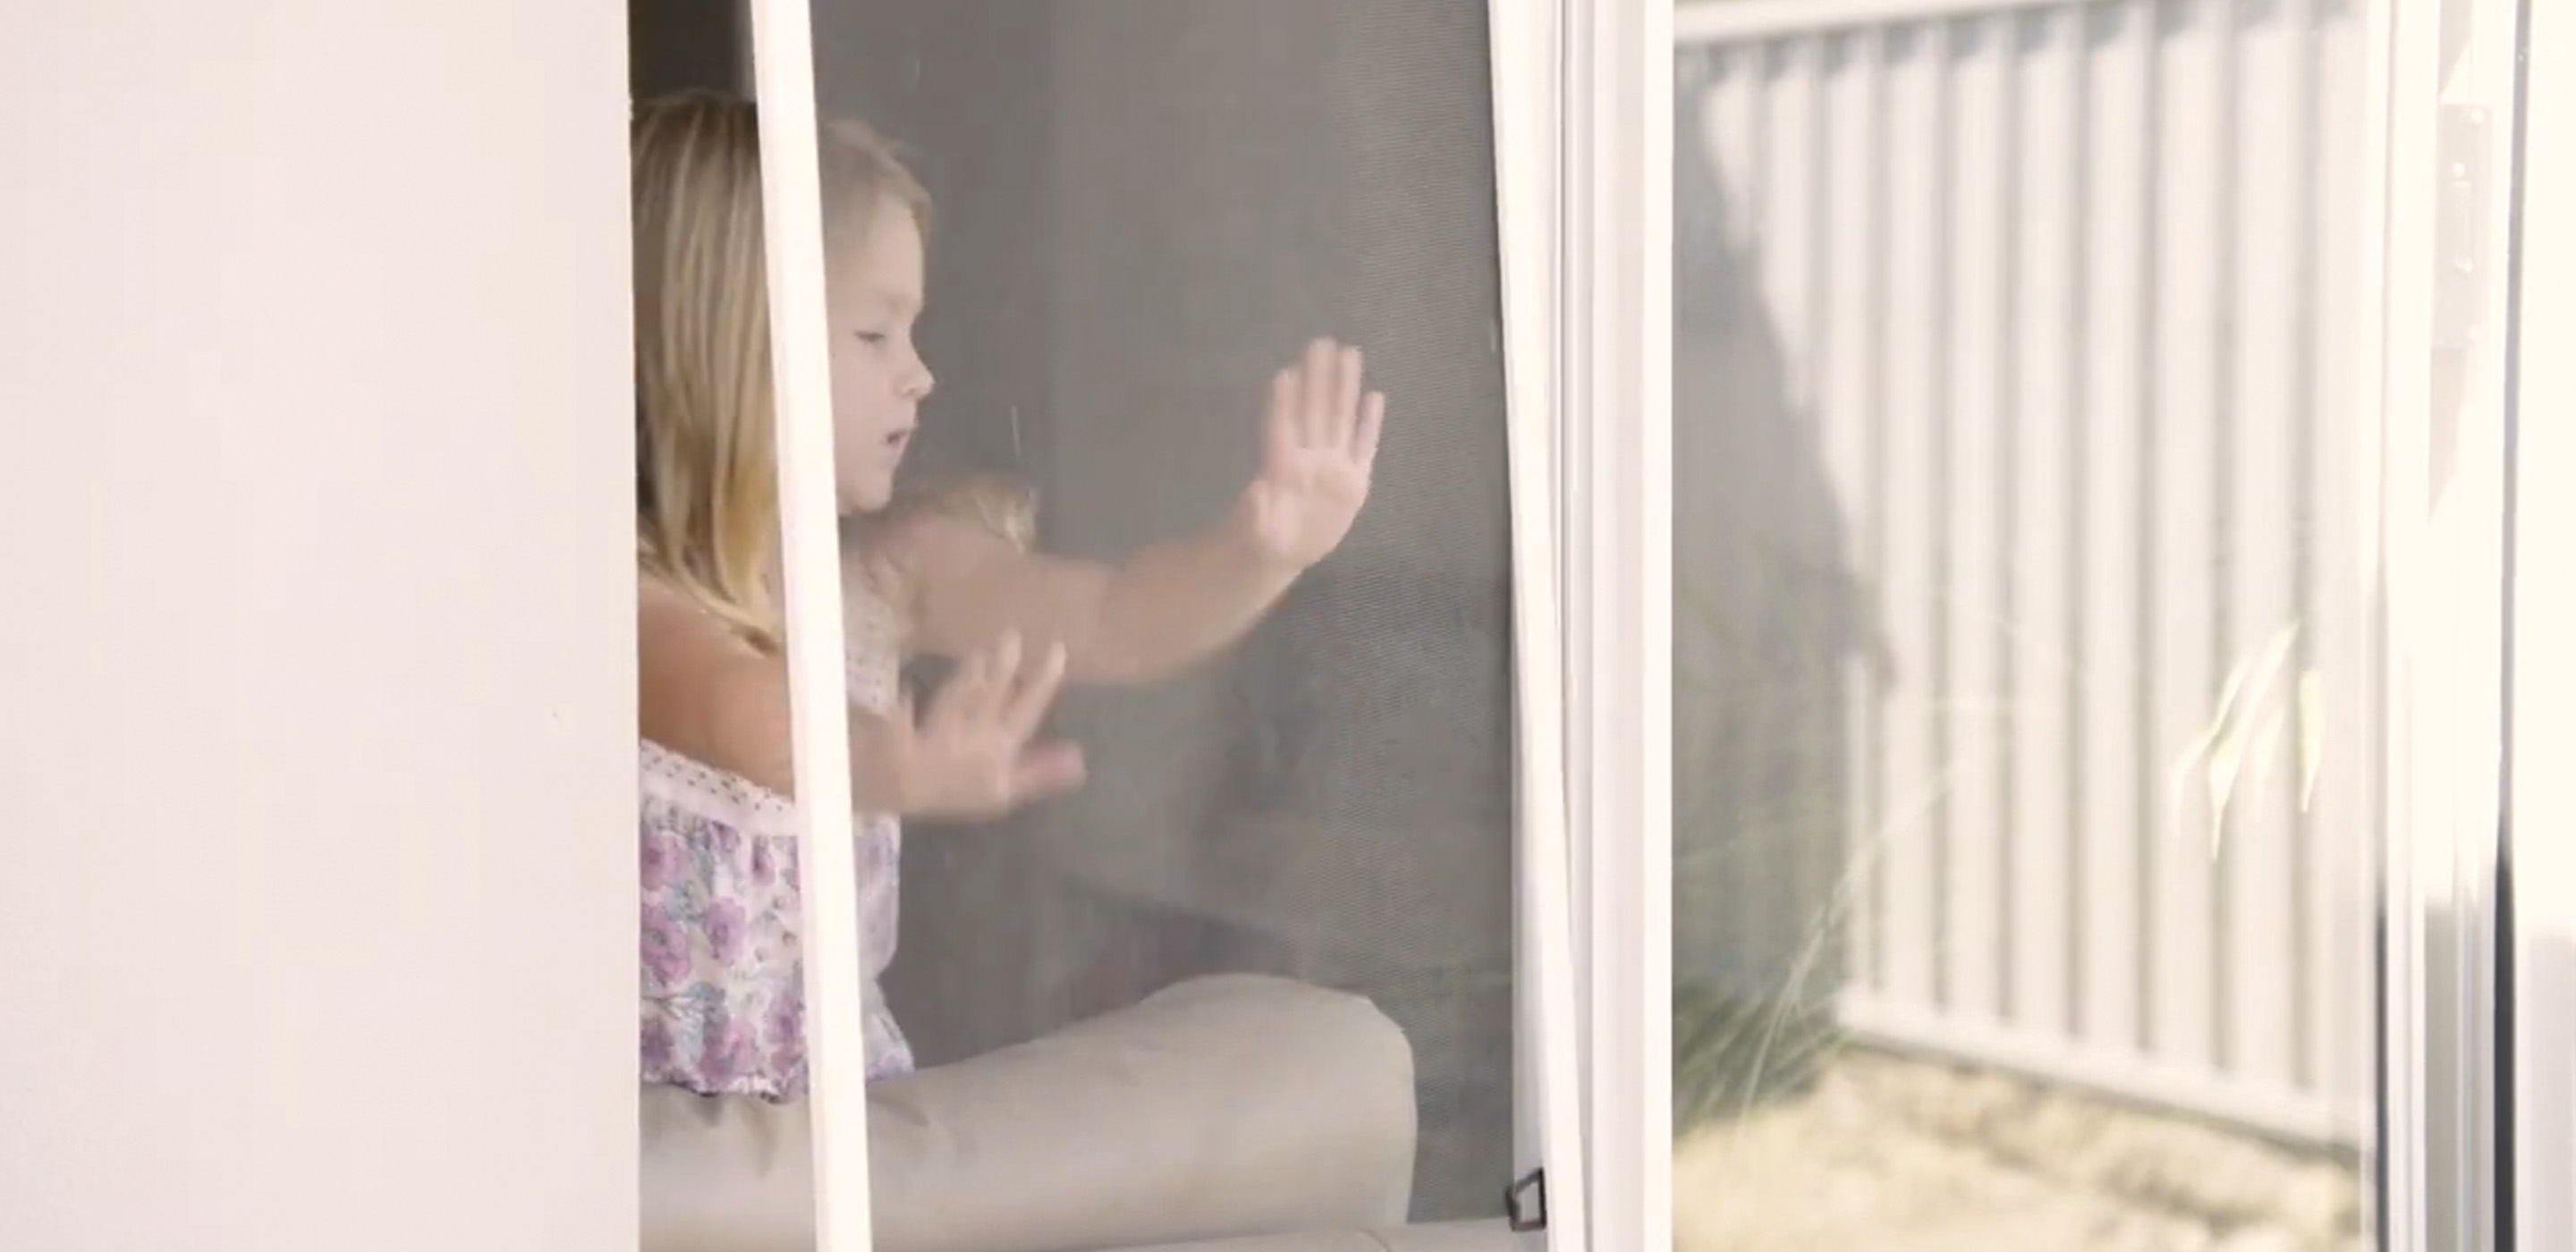 A young girl has managed to push the flyscreen off the window creating a fall risk. Replace flyscreens with Jason Security Screens to remove this risk.